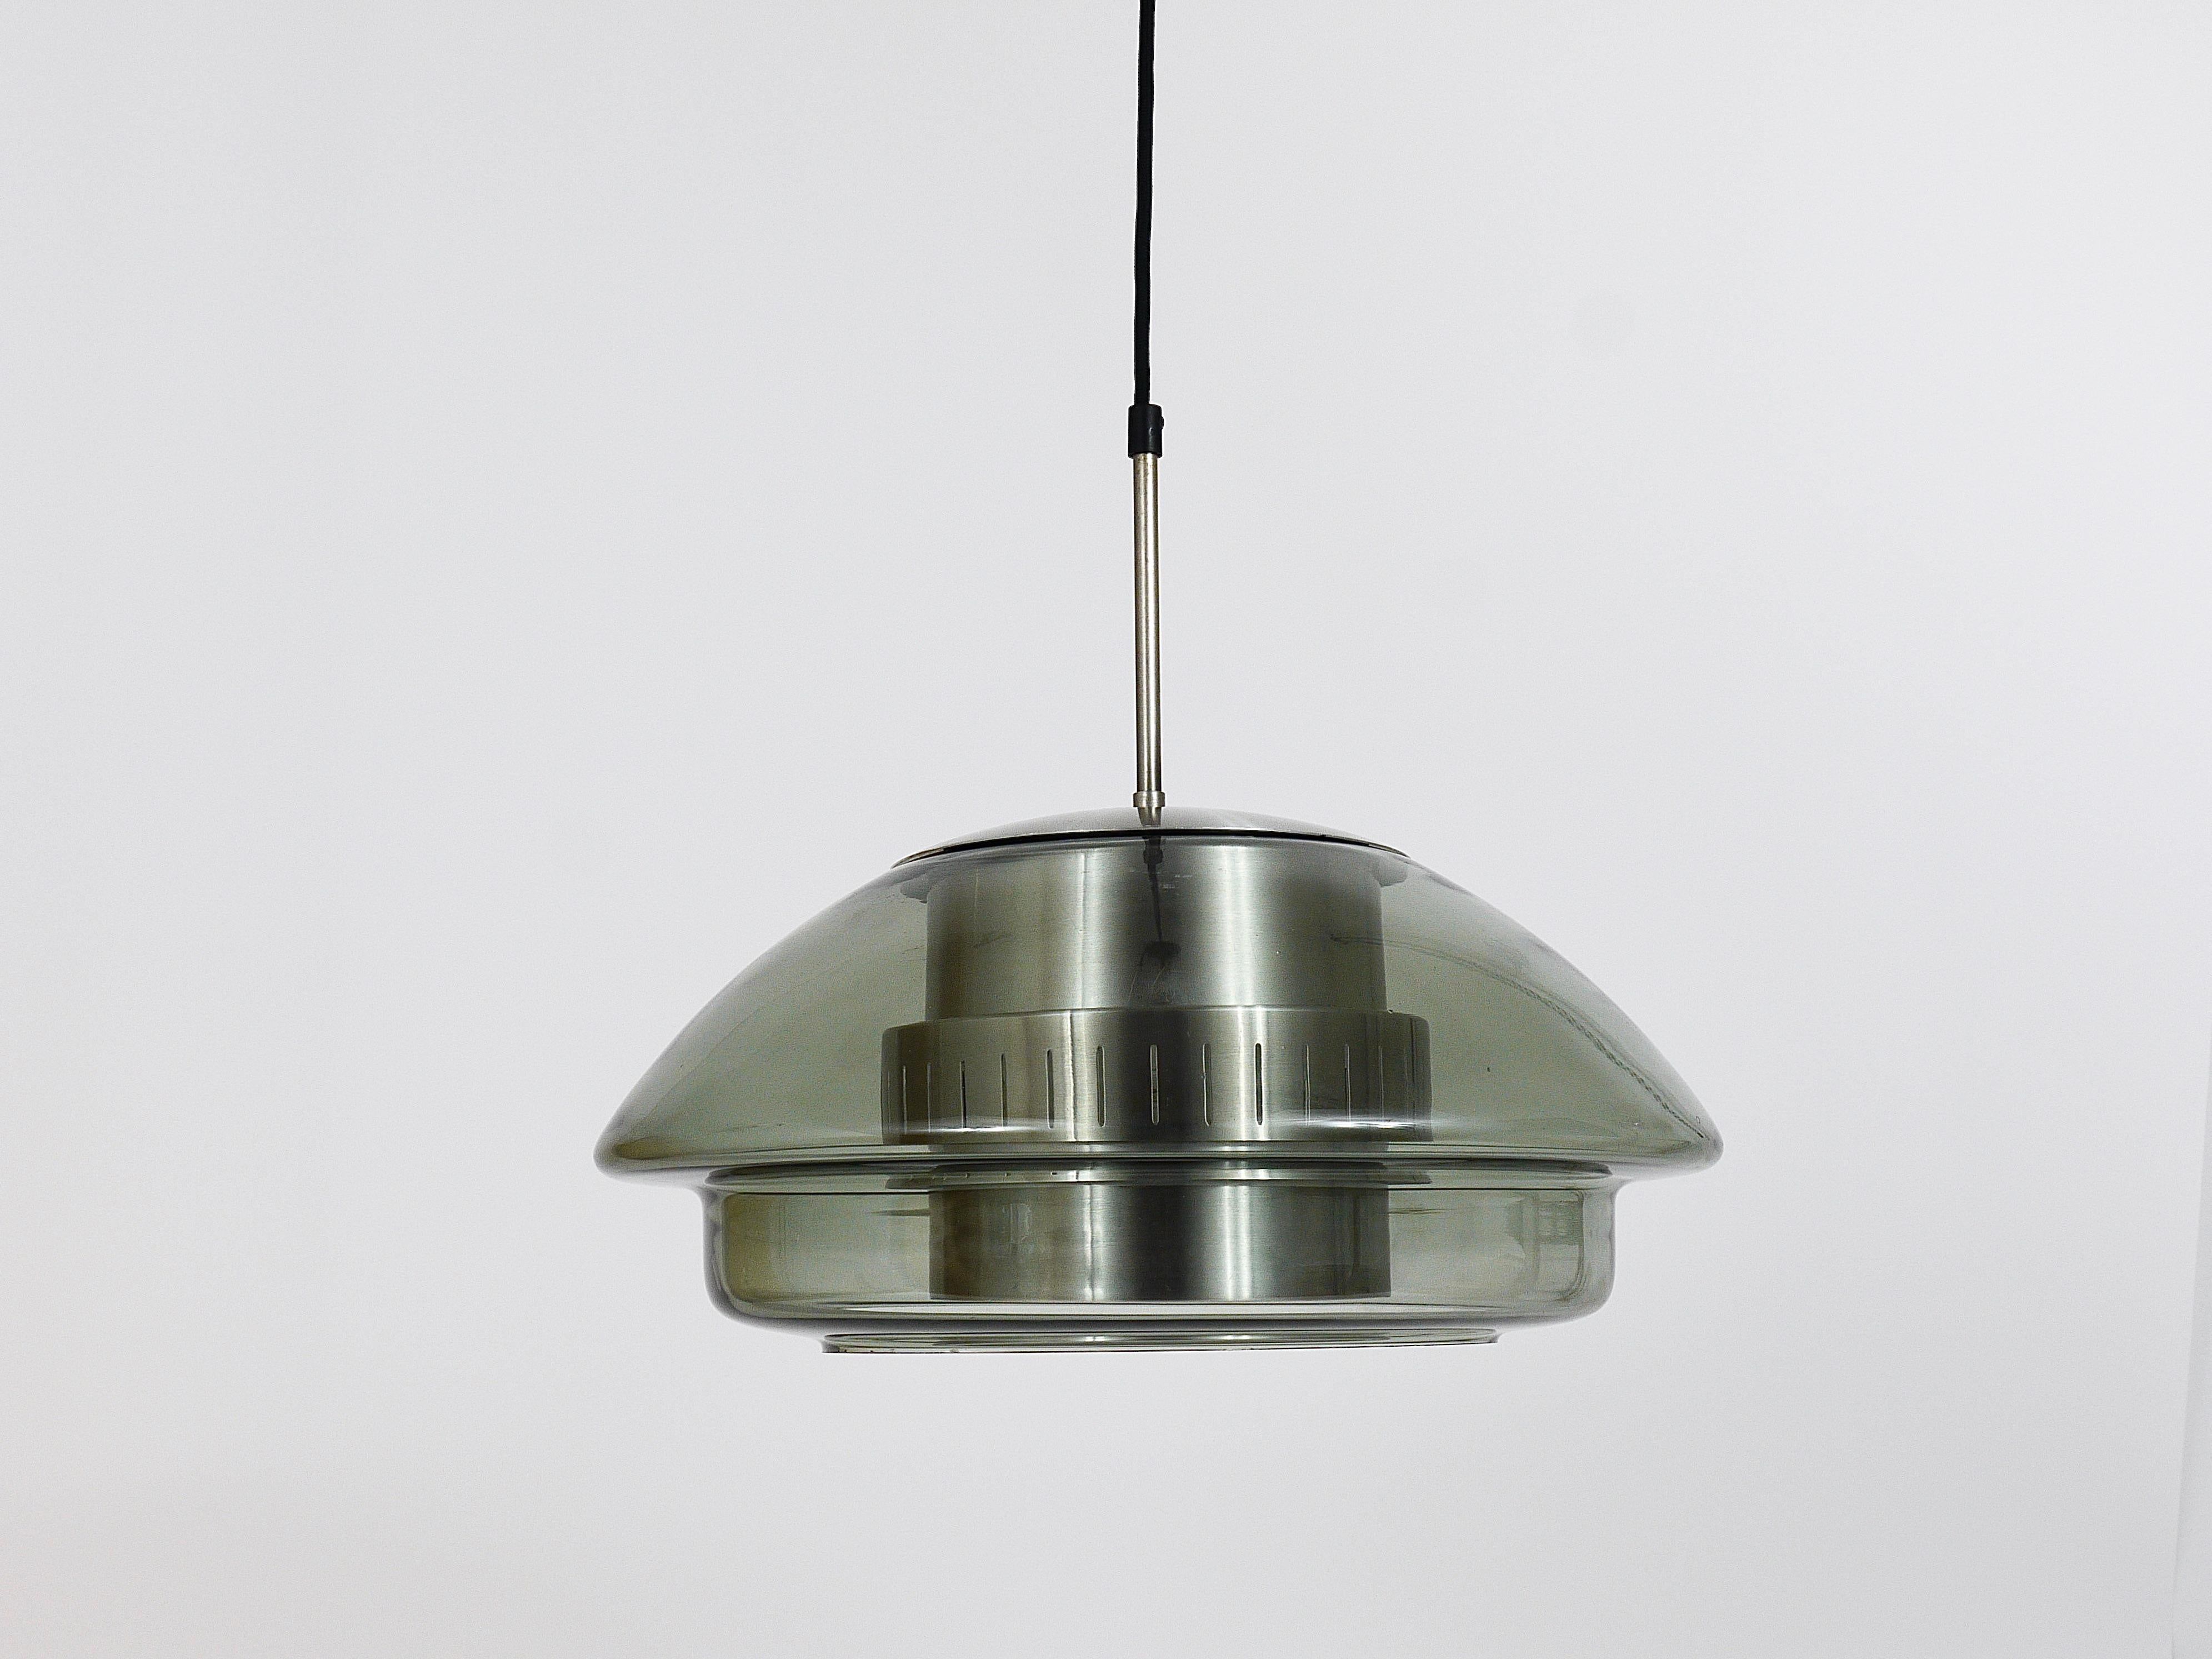 A beautiful Danish Midcentury pendant light from the 1960s. Made of silver aluminum with a nice round lampshade, made of grey smoked glass. In the style of Jo Hammerborg / Fog & Mørup. In good condition with age-related patina. Makes a wonderful